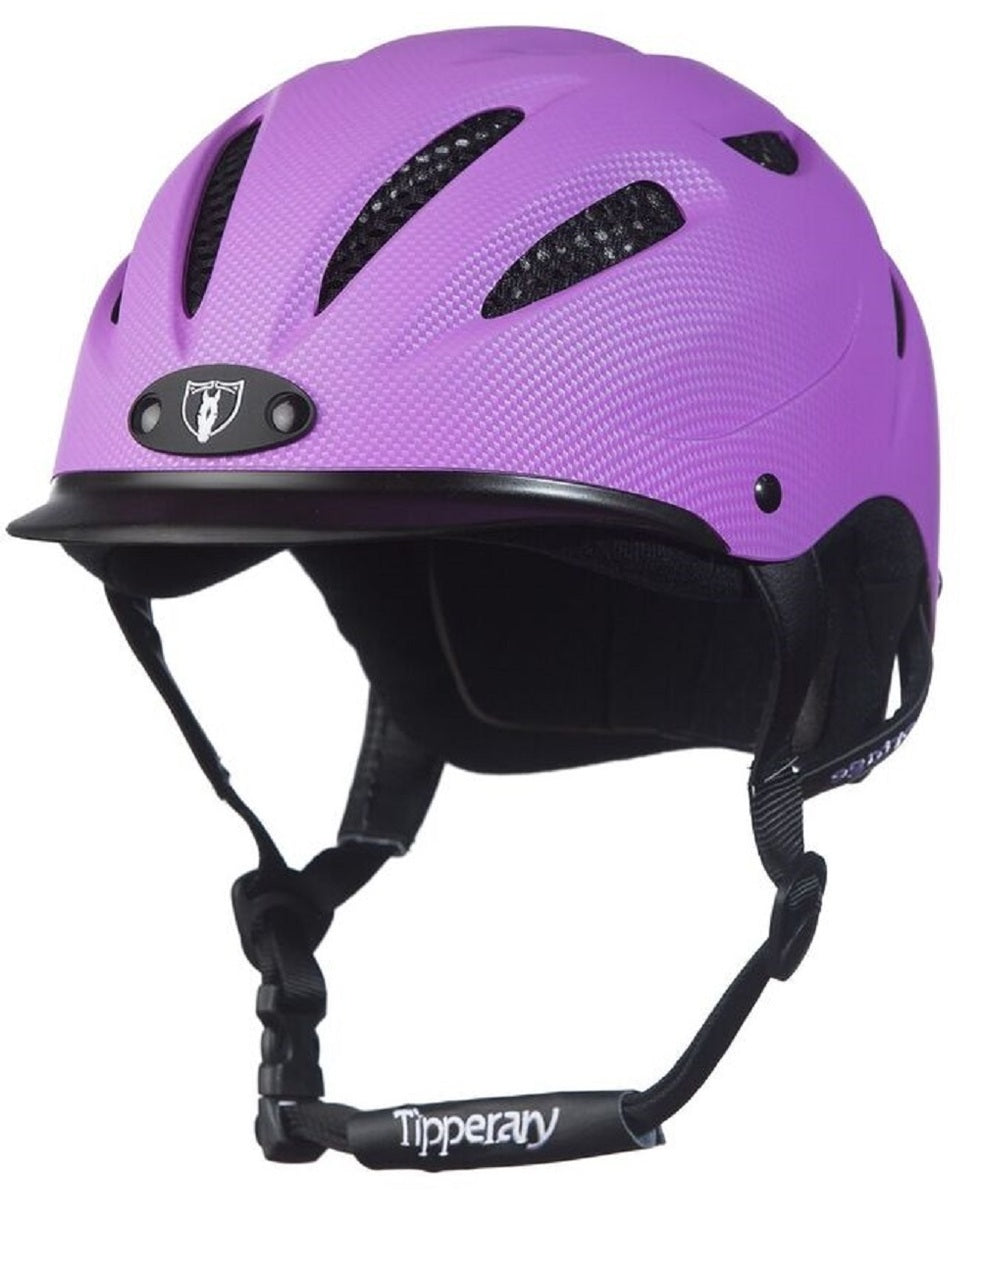 Tipperary Riding Helmet Sportage Low Profile Horse Safety Purple 8500